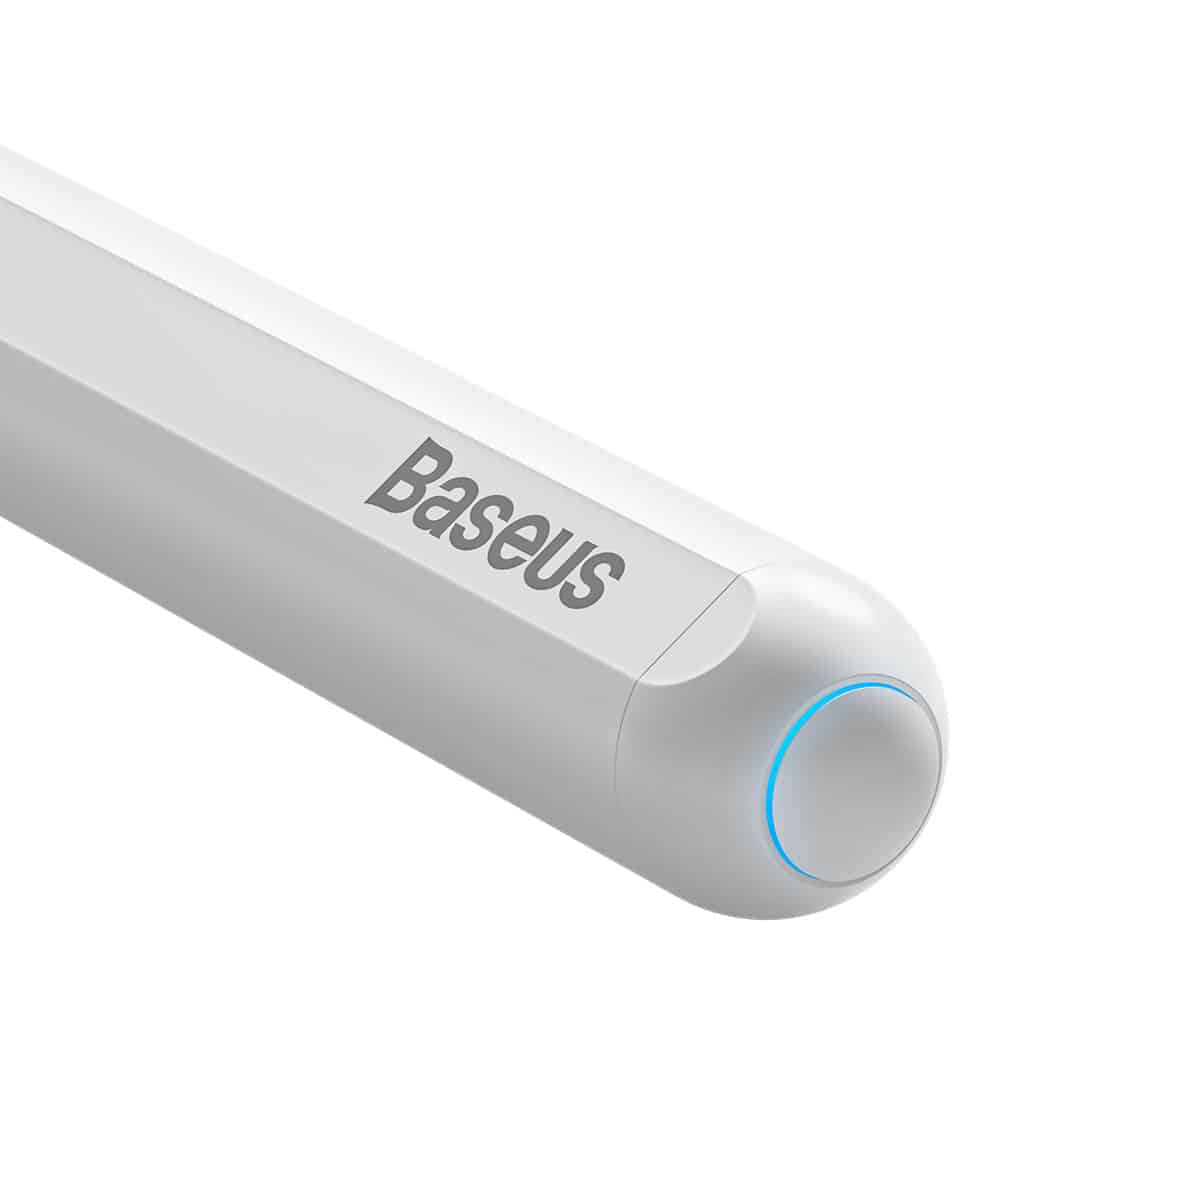 Baseus Penchang 2nd generation wireless capacitive writing pen white (active version includes: active head*1)